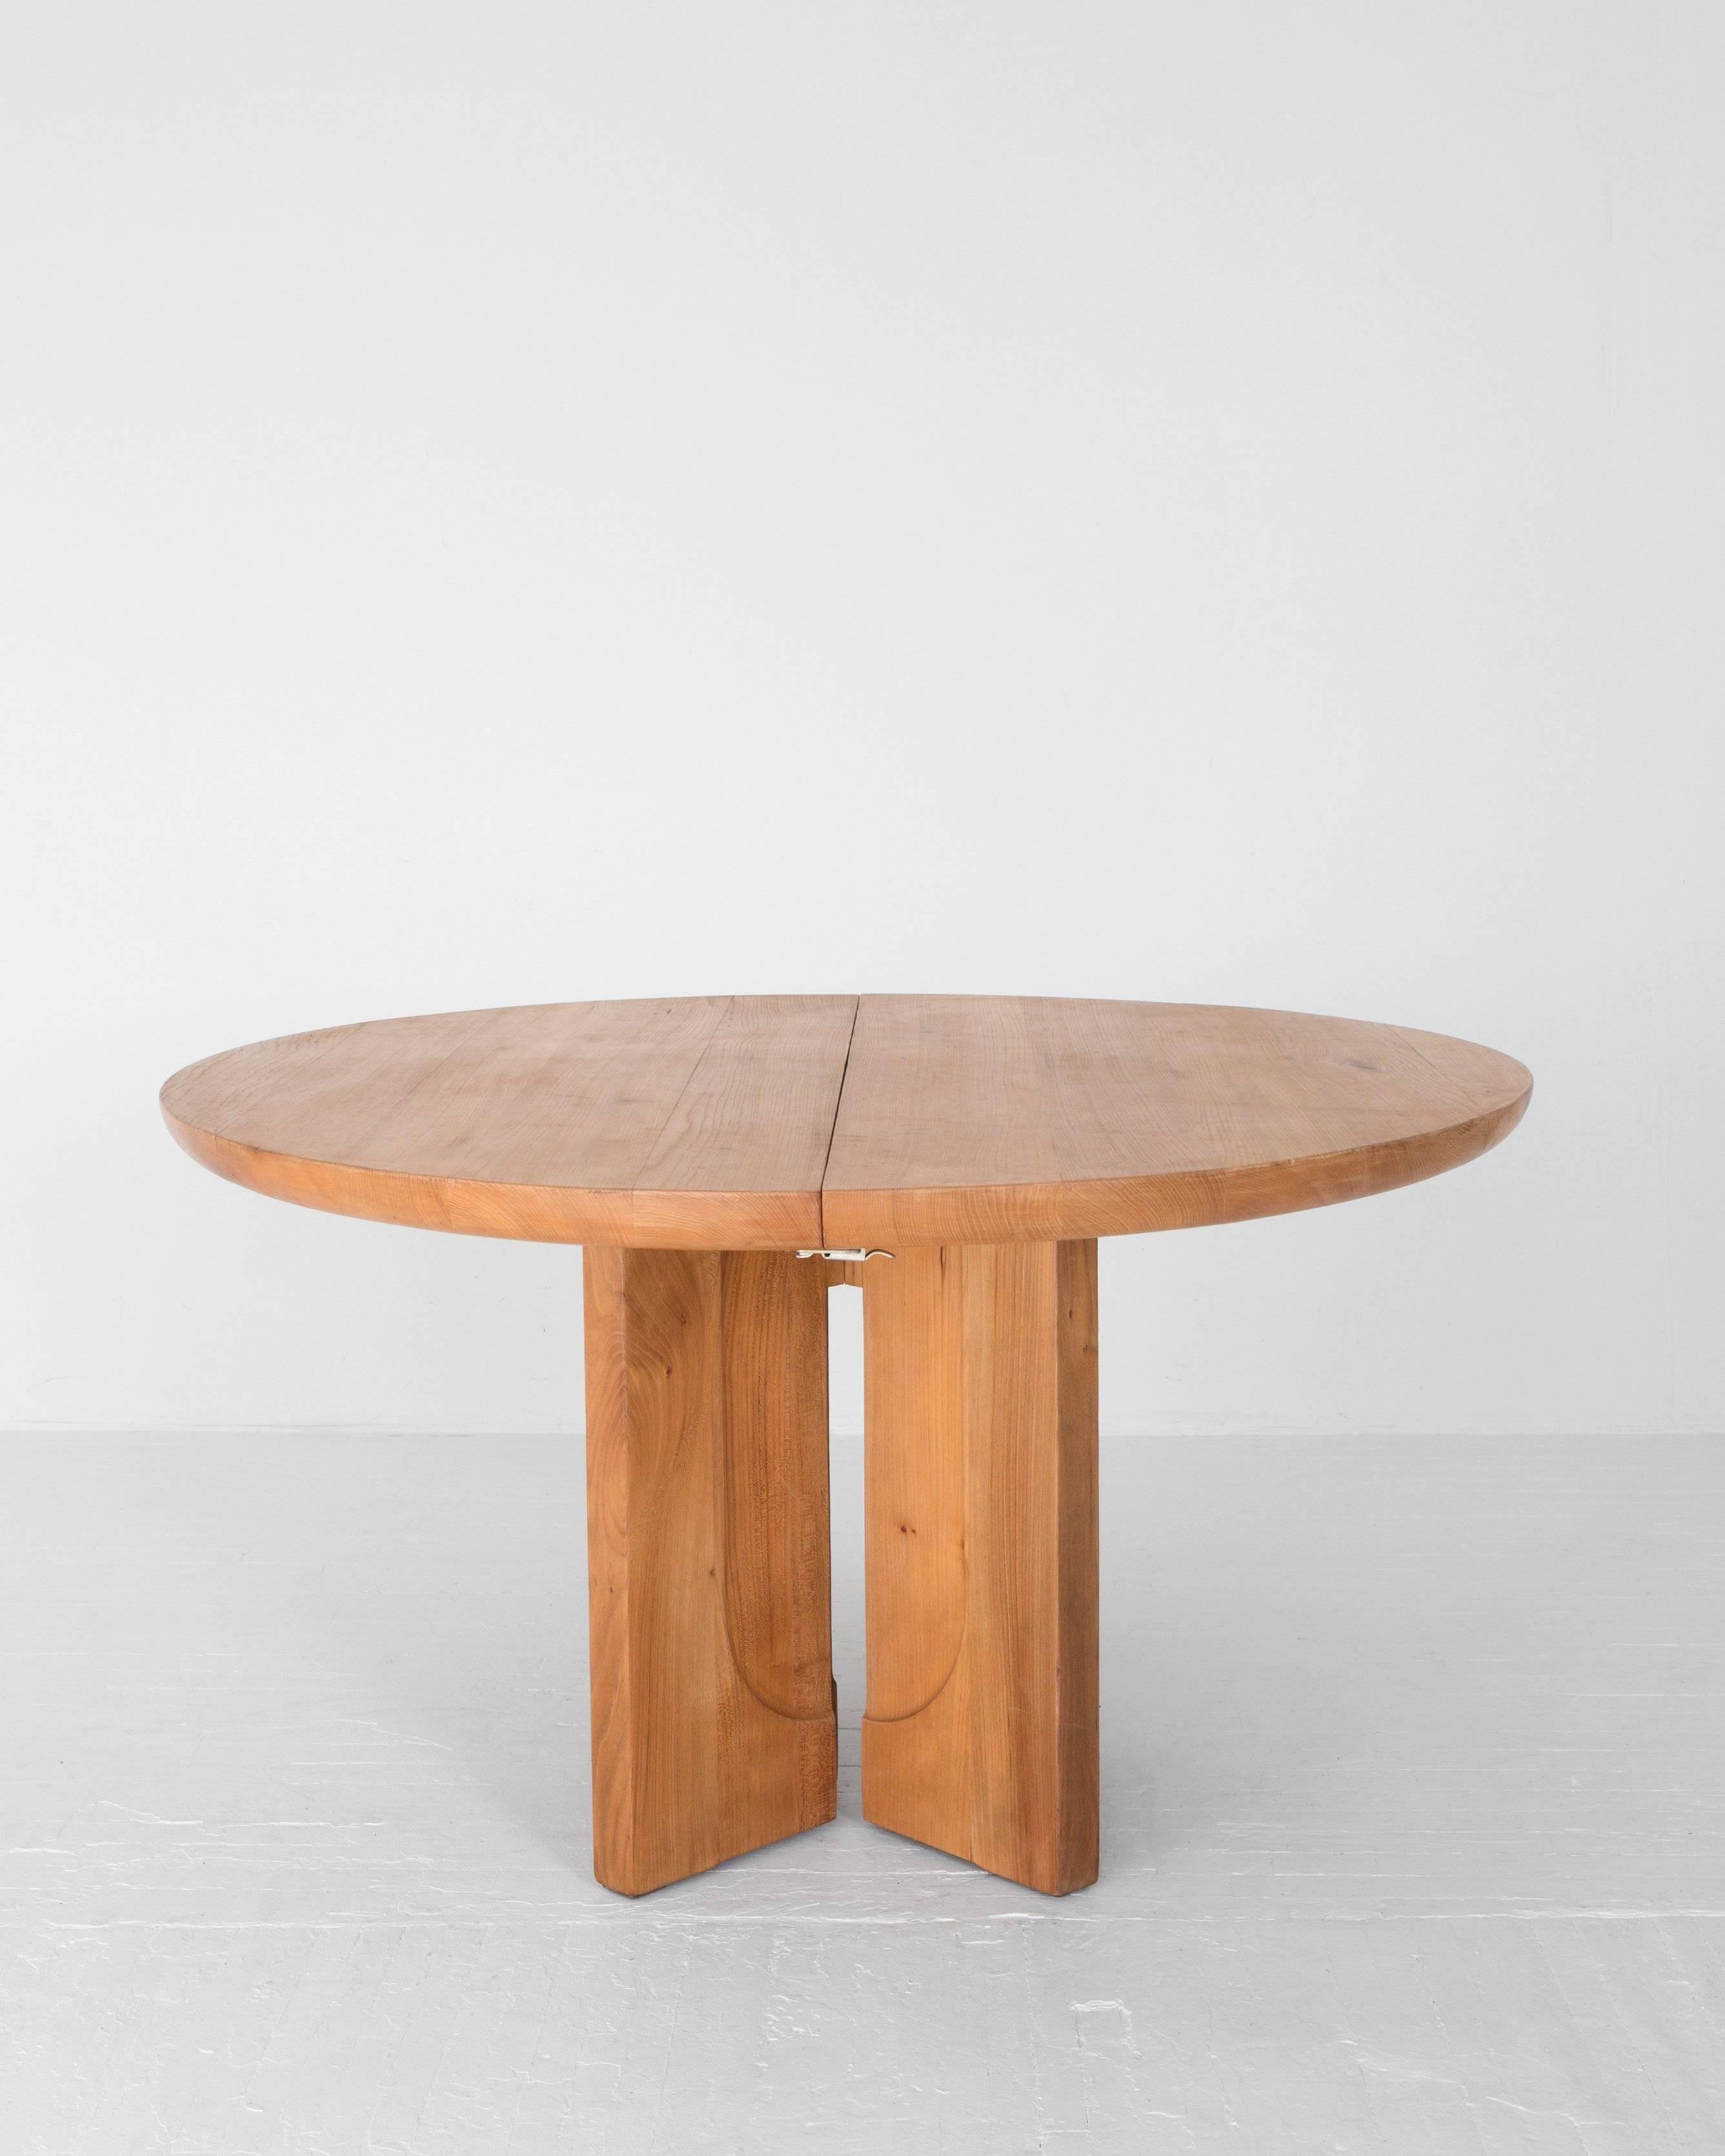 Handsome and well-built elm table in the style of Pierre Chapo. 

Measures: Centre leaf is 18